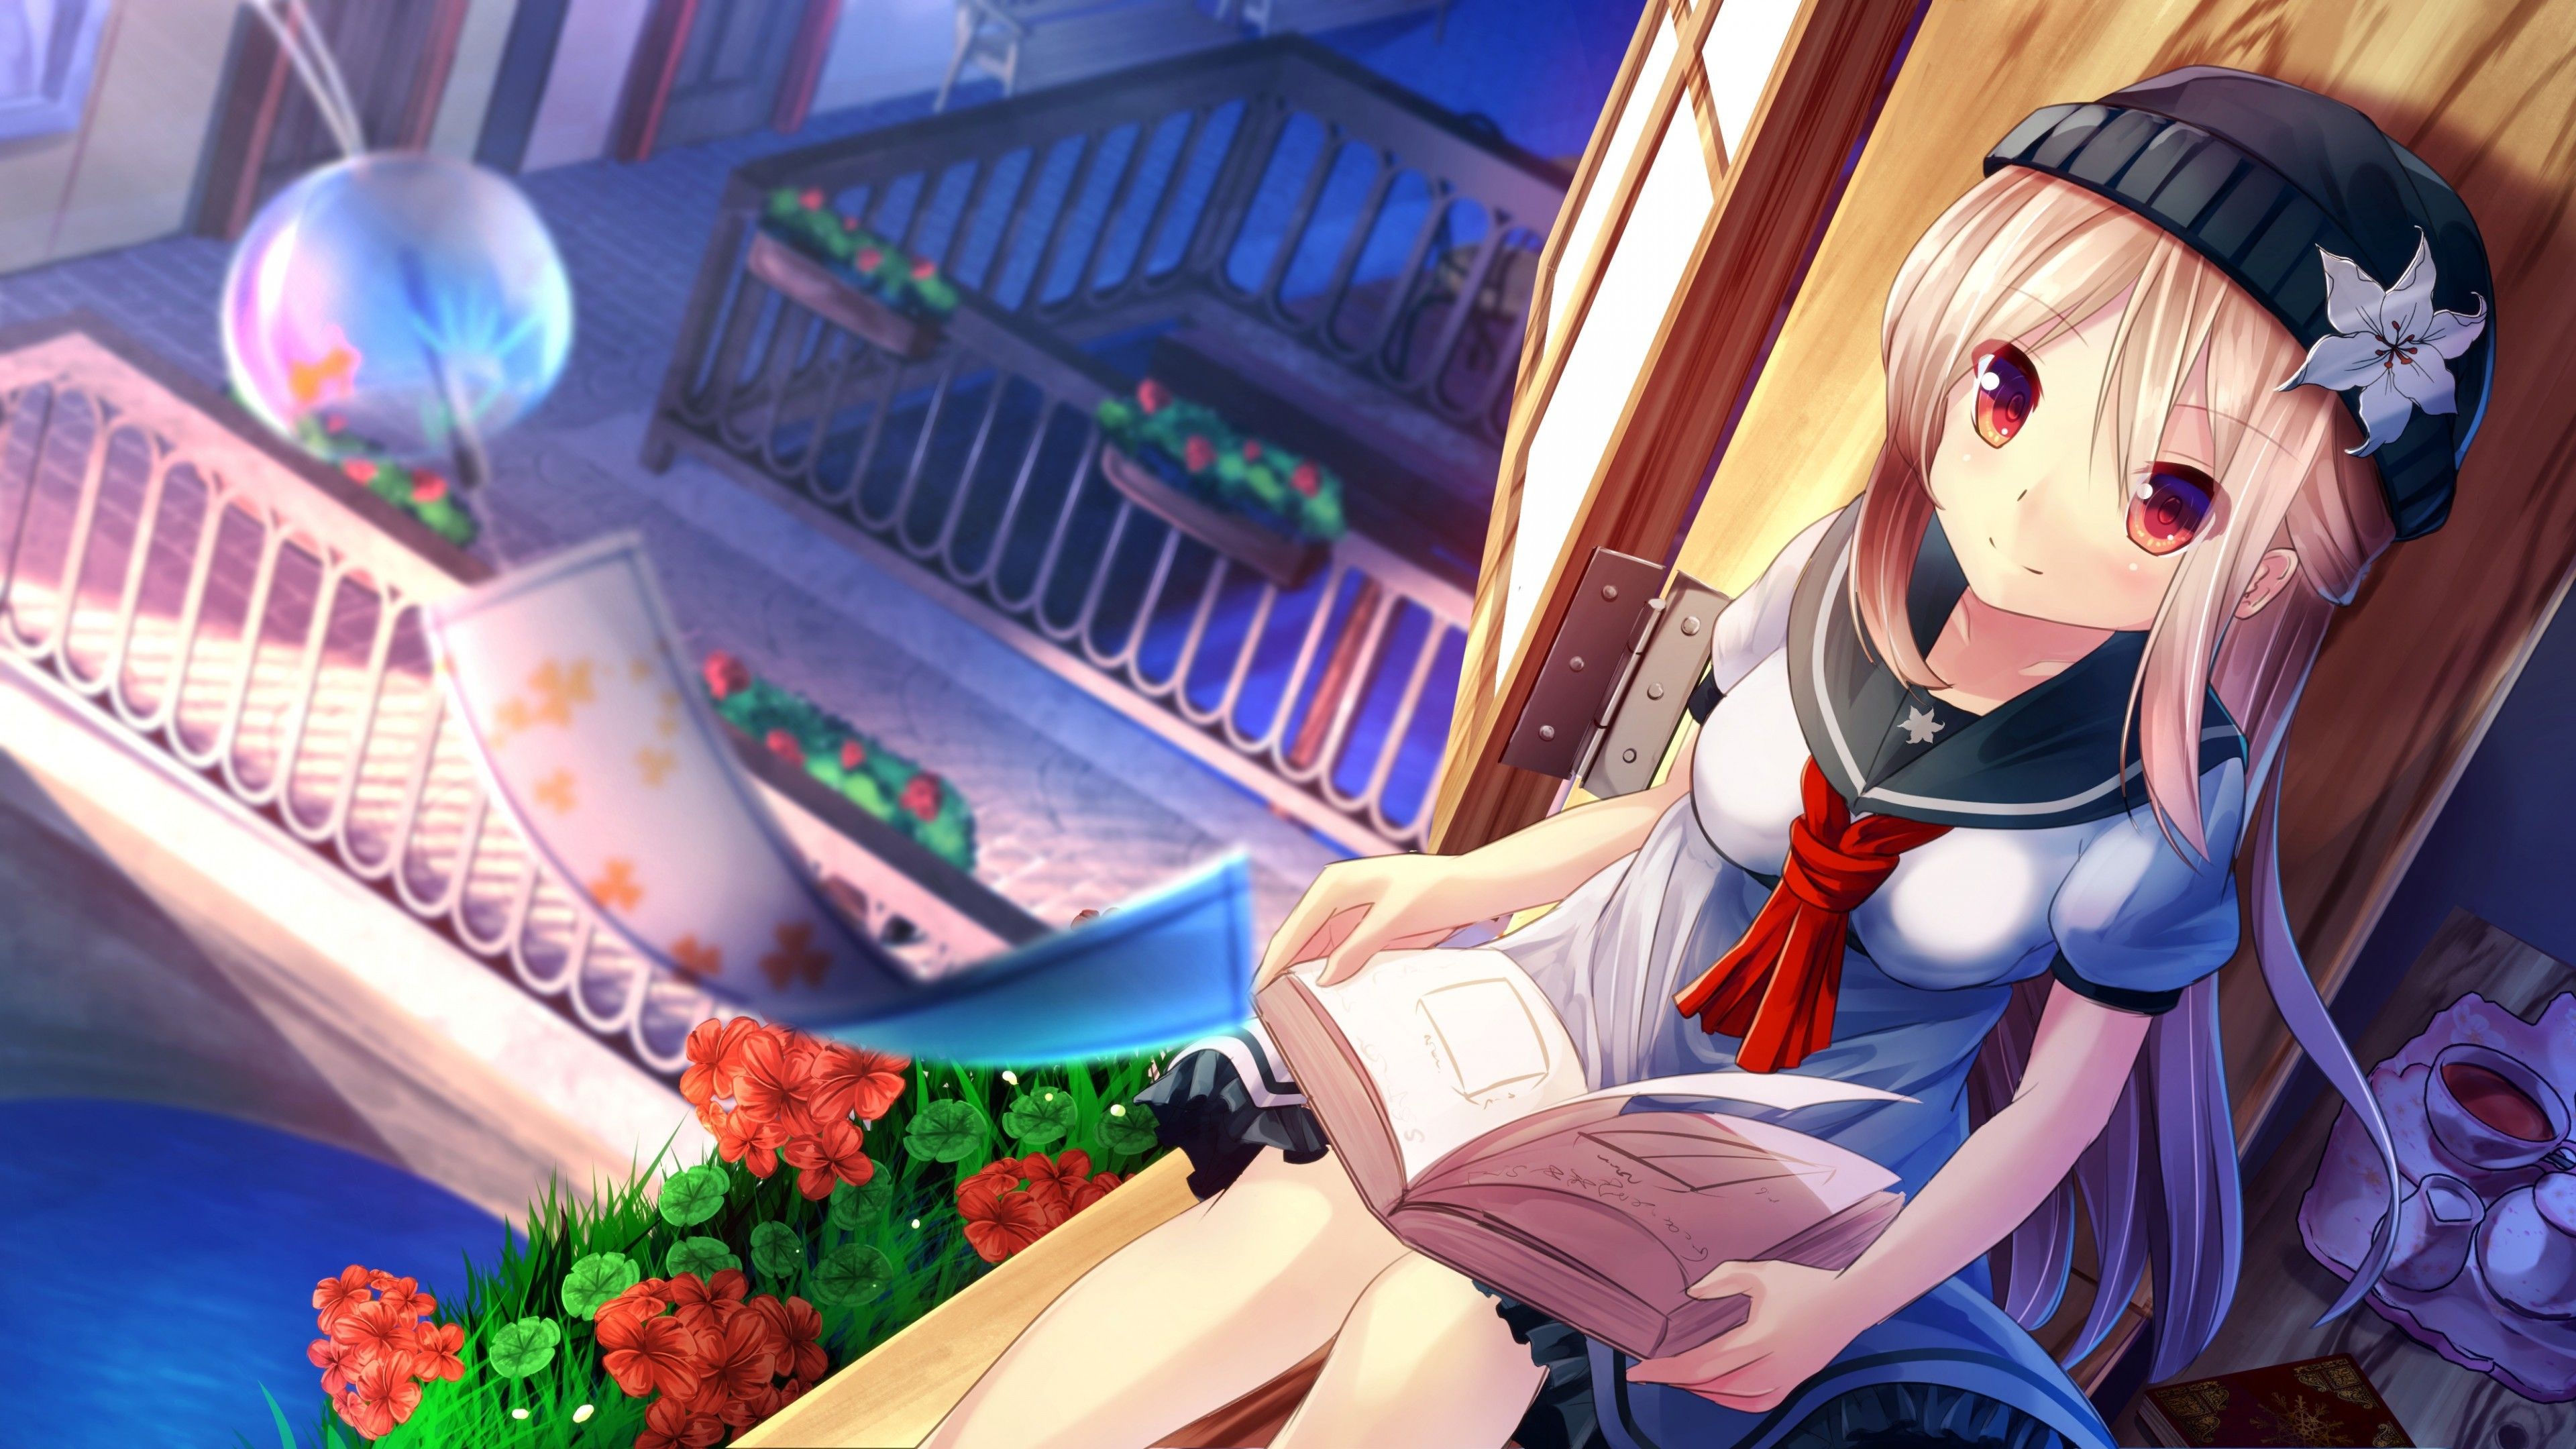 Download 3840x2160 Anime Girl, Sitting, Reading A Book, School Uniform, Wind Wallpaper for UHD TV